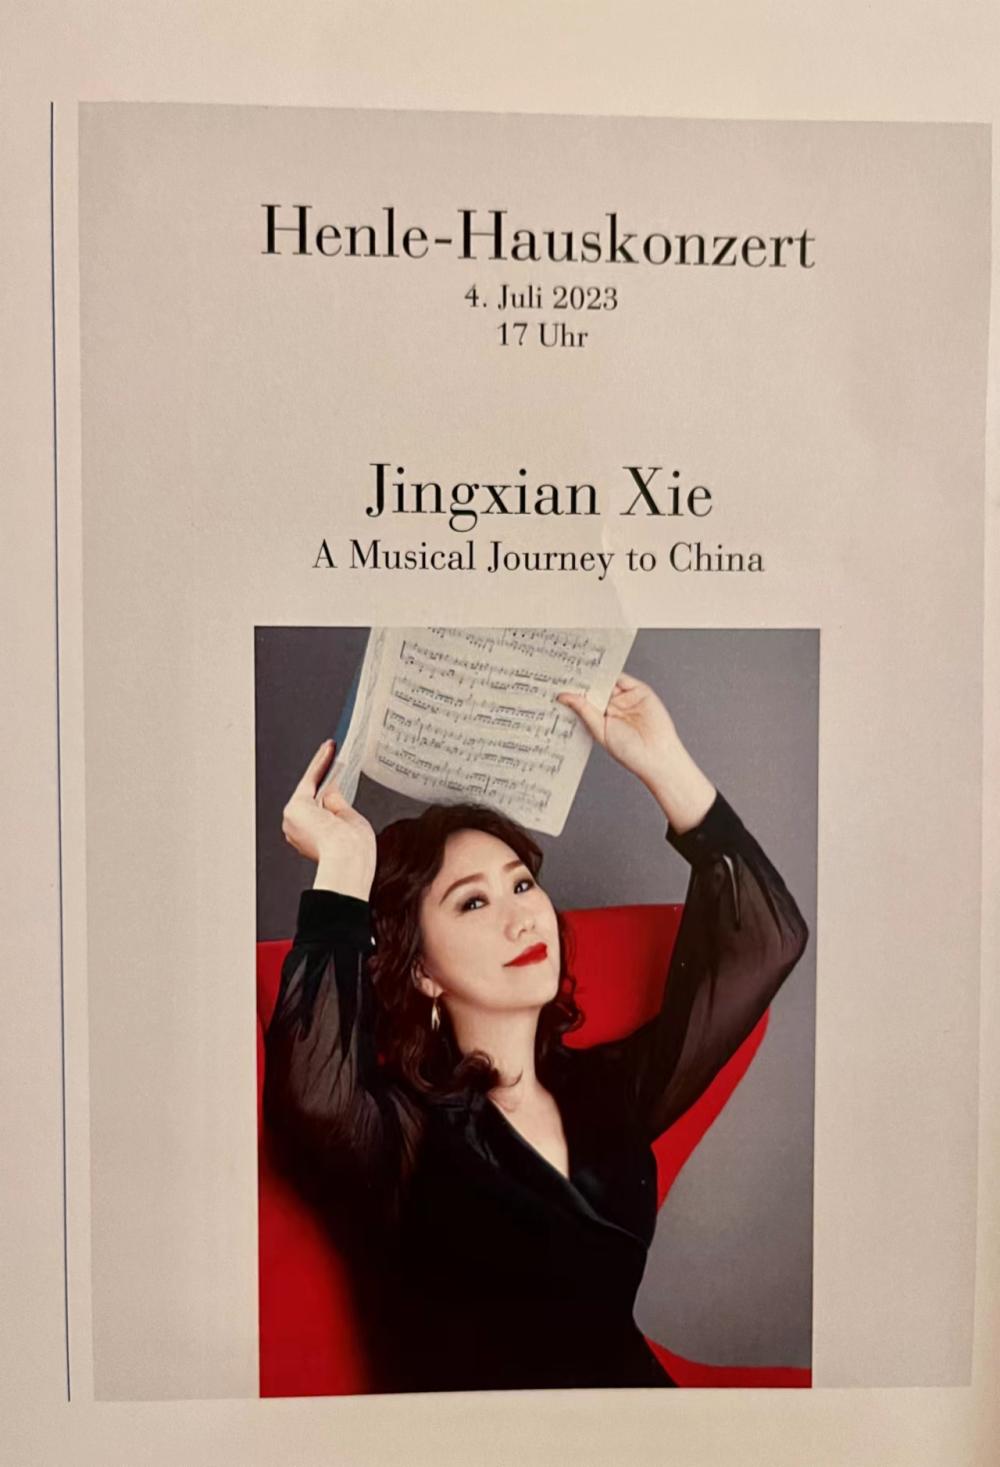 "20th Century Chinese Piano Masterpieces" will be released in Europe, with pianist Jie Jingxian playing the Chinese Melody Piano in Munich | China | 20th Century Chinese Piano Masterpieces